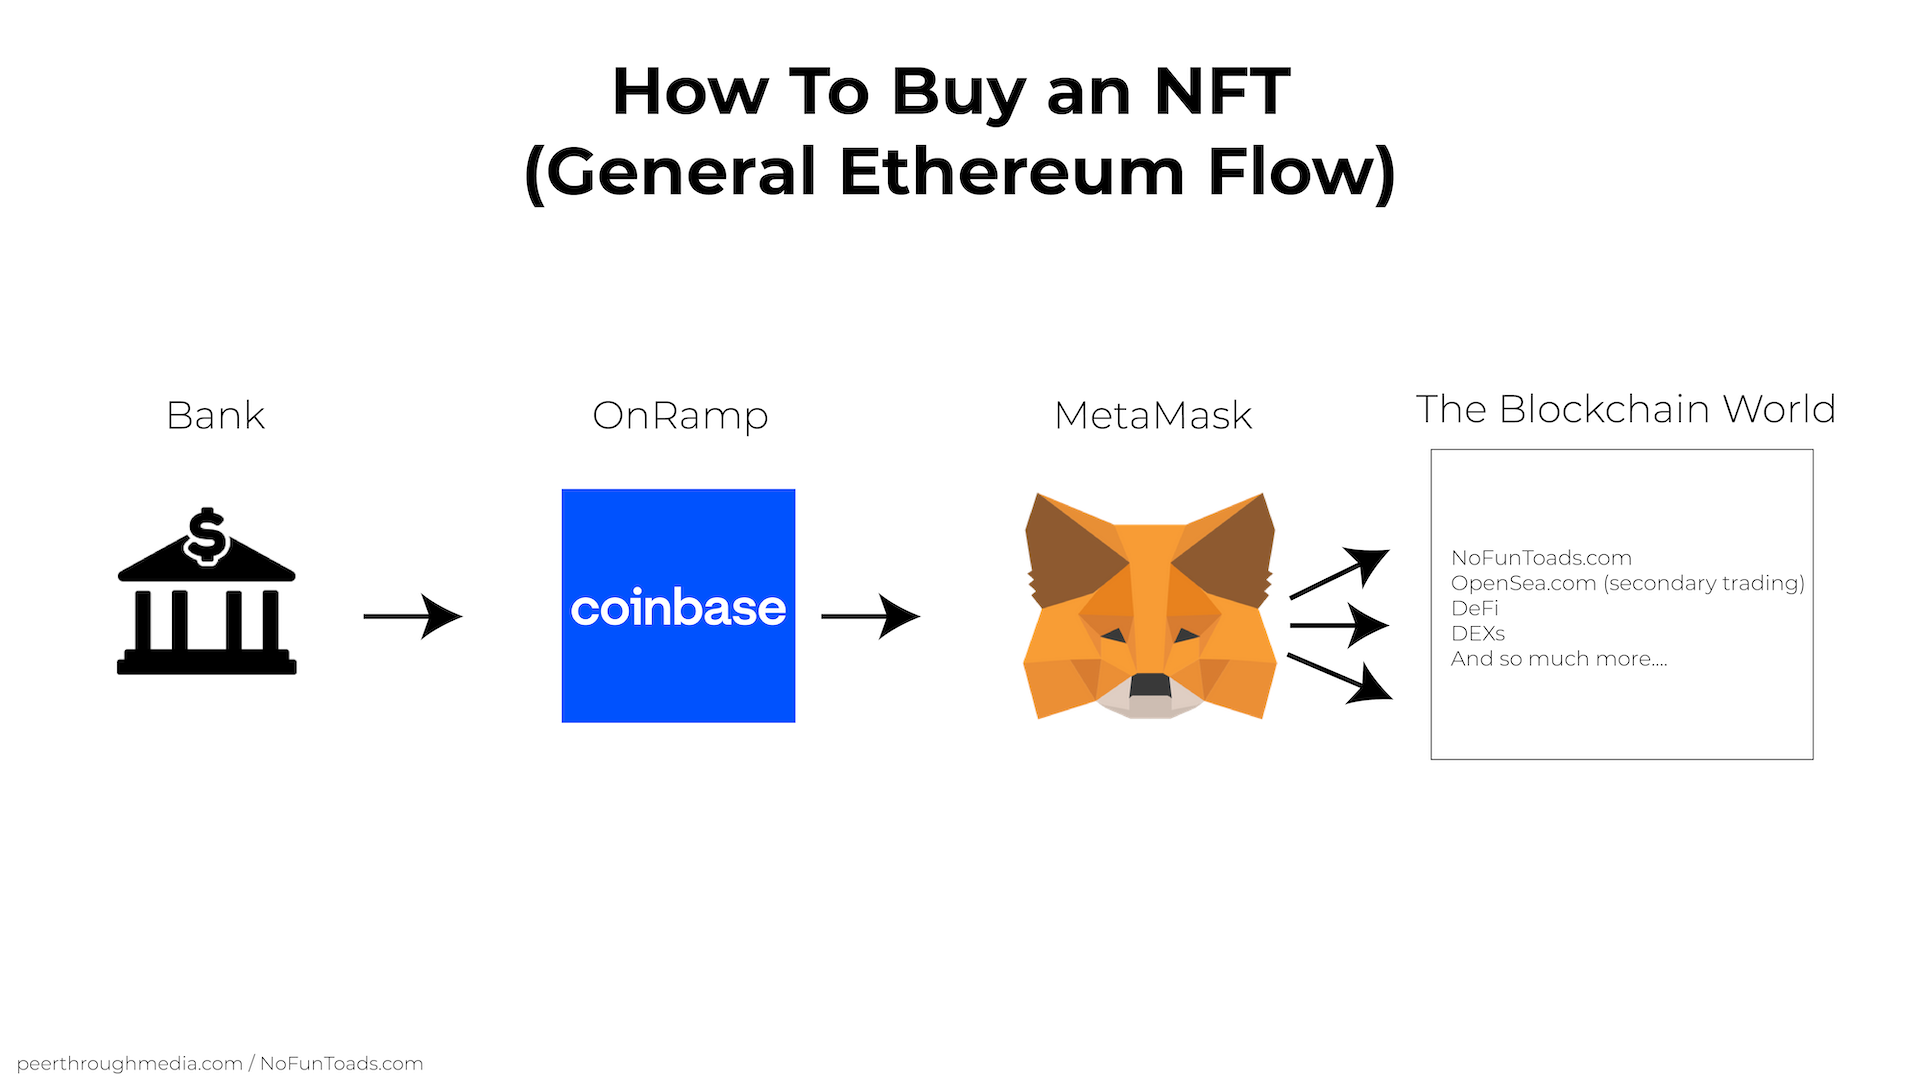 How To Buy an NFT